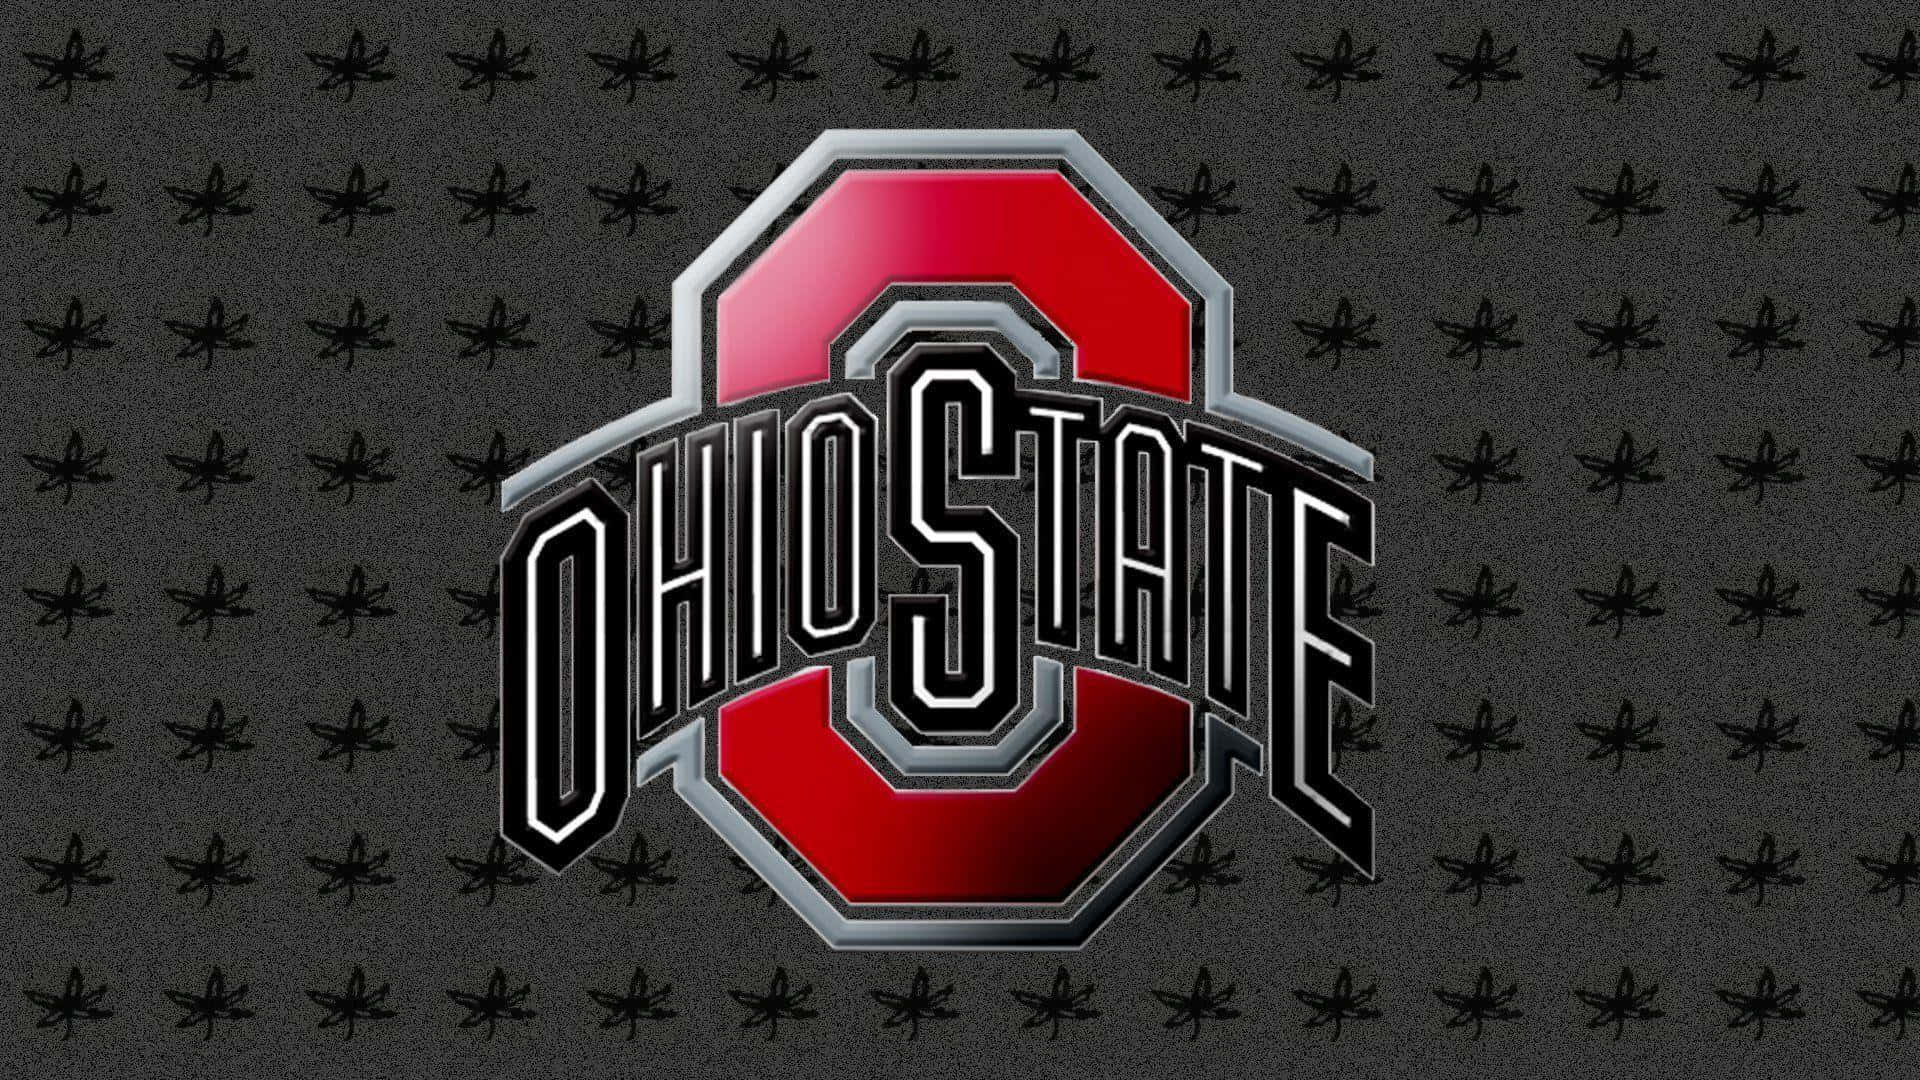 Majestic Ohio State University Logo on a Vibrantly Colored Background Wallpaper